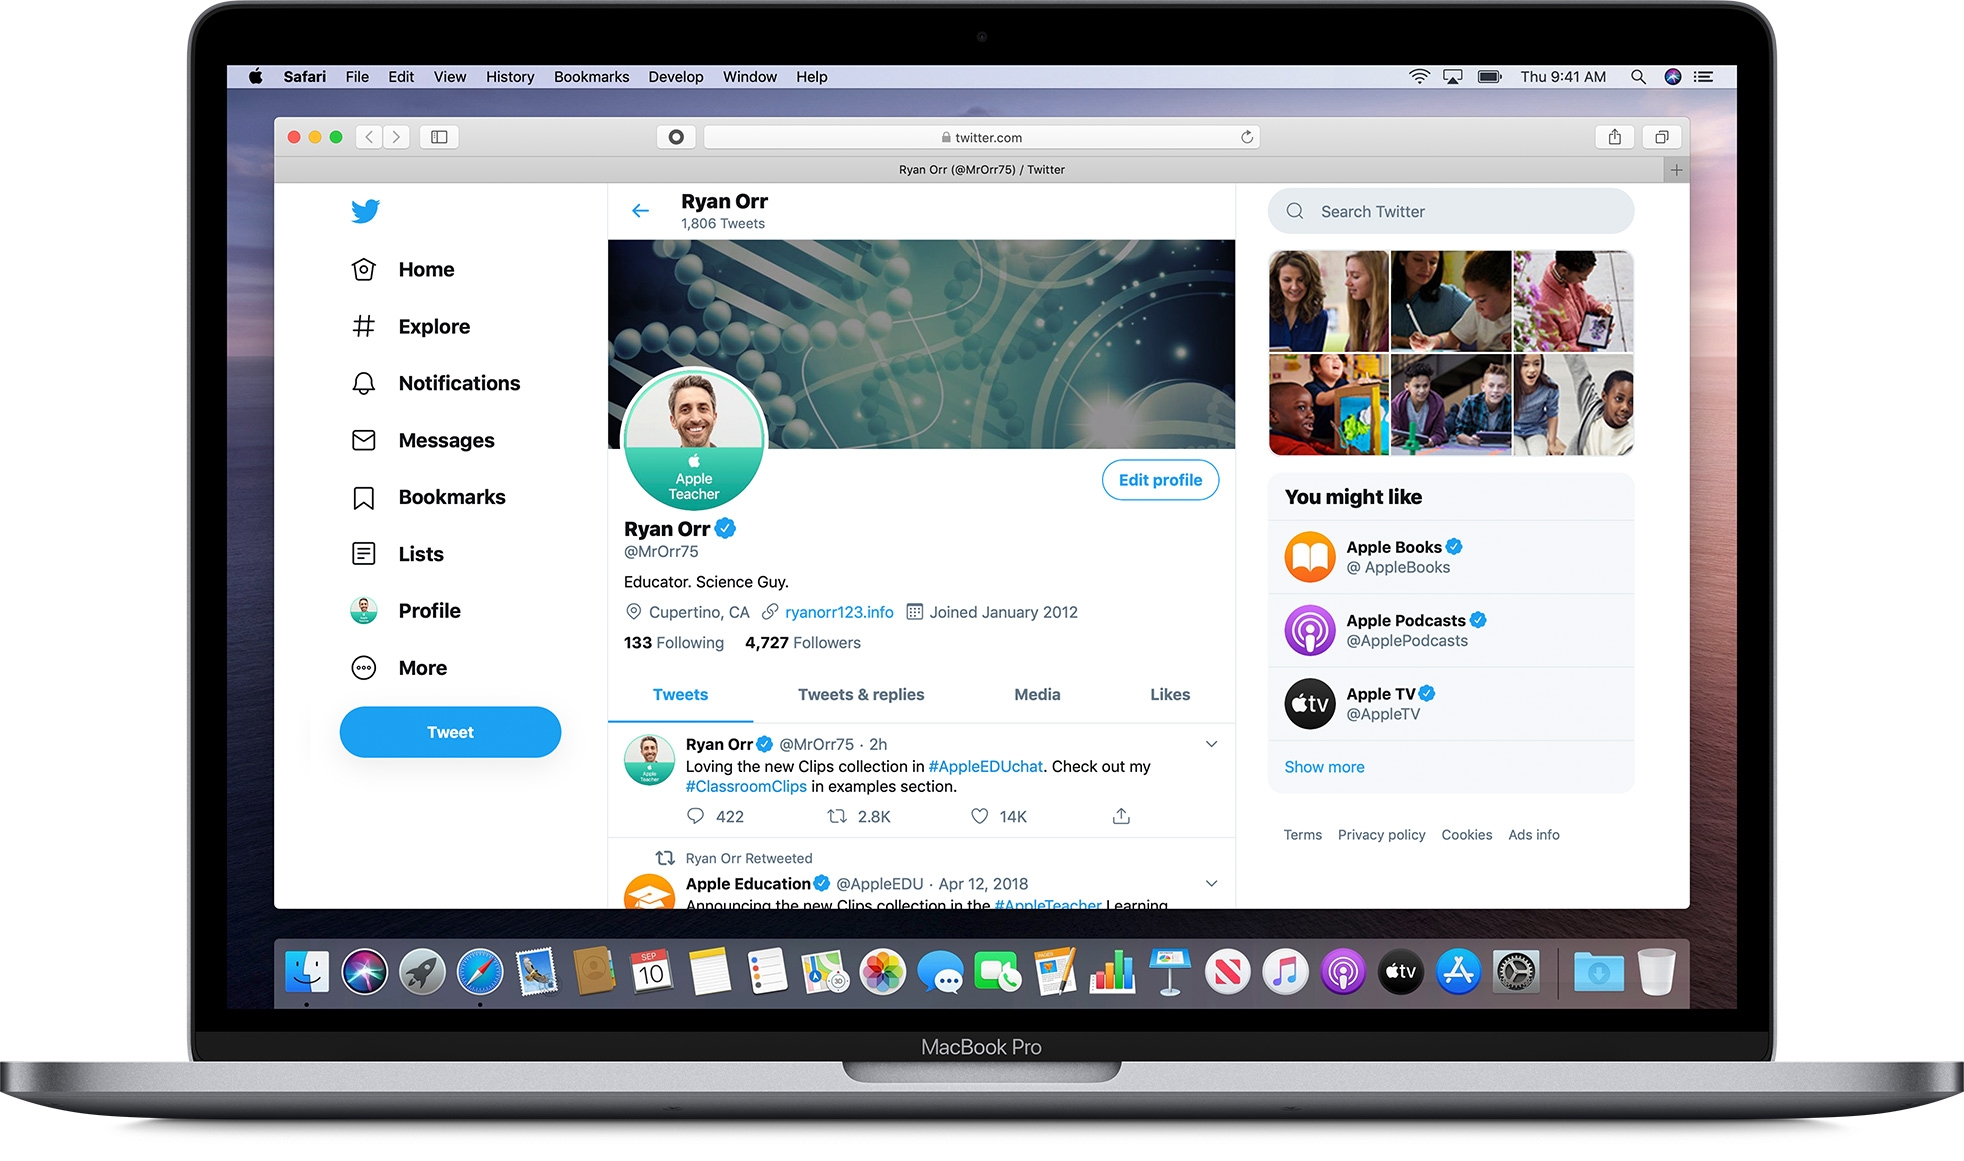 MacBook Pro showing a Twitter page with an official Apple Teacher profile image